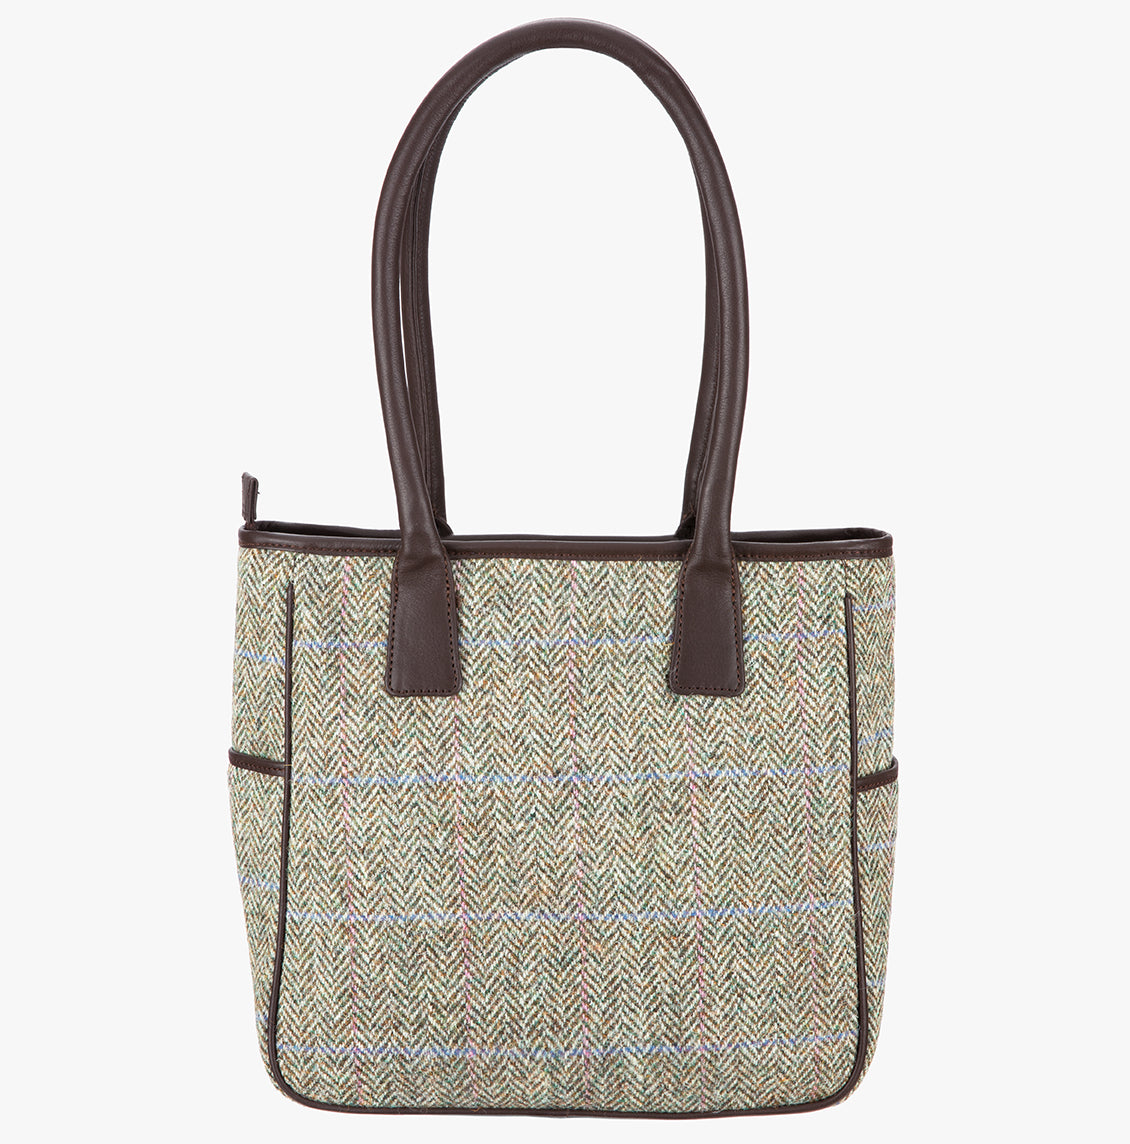 This is the reverse of the Harris Tweed tote bag in pastel check with handles that go over the shoulder. This bag's colour is brown and cream herringbone with a pink and pale blue over check. It has a pocket on each side of the bag trimmed with brown leather.